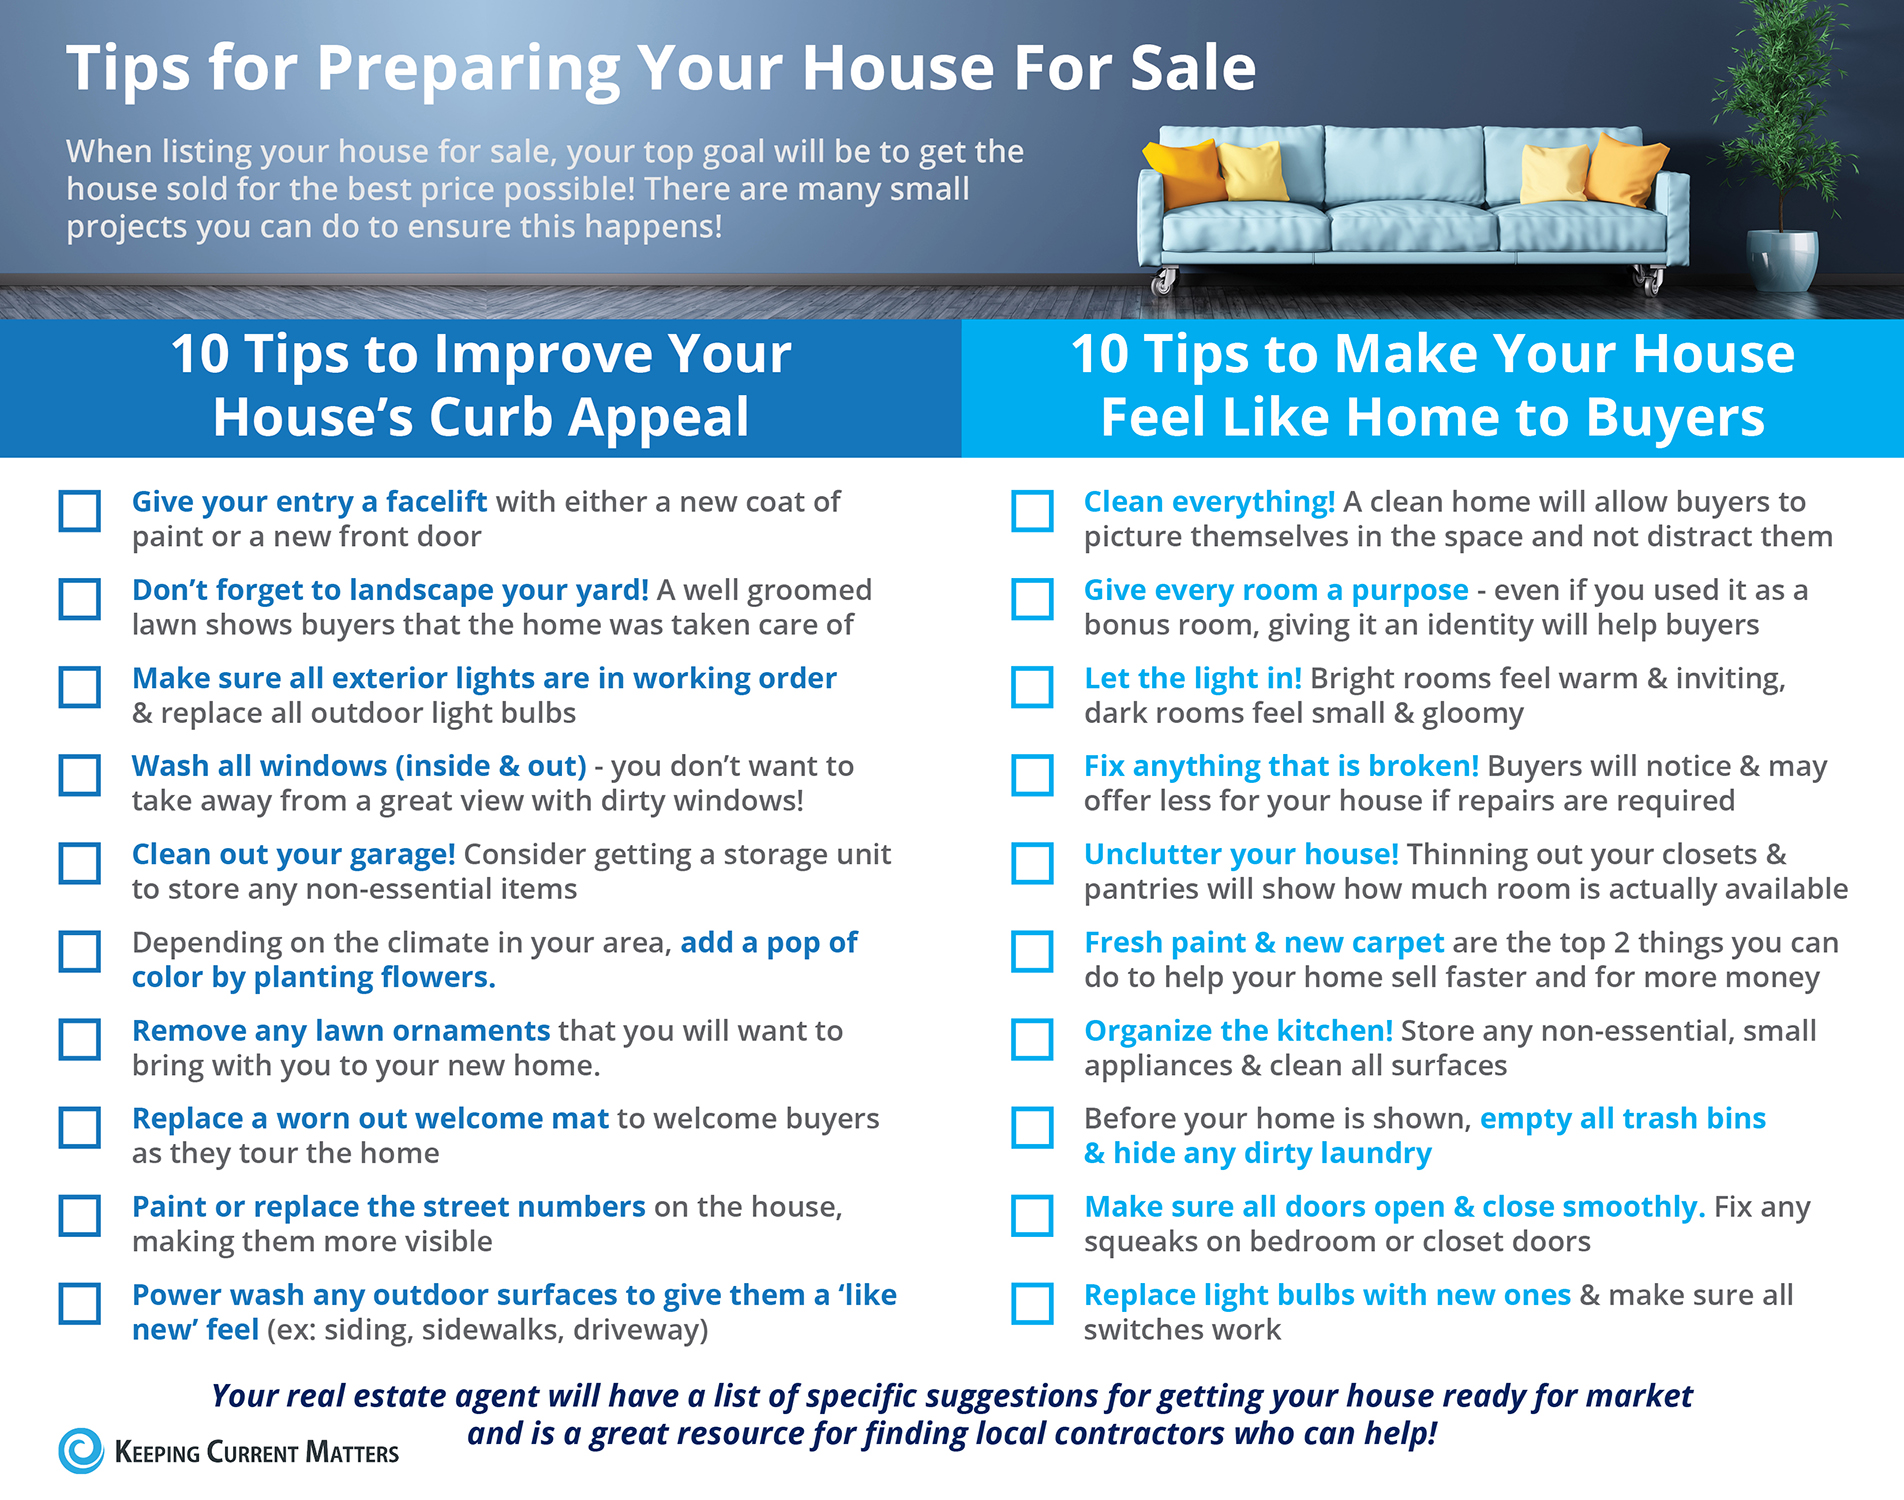 Tips for Preparing Your House For Sale [INFOGRAPHIC] | Keeping Current Matters